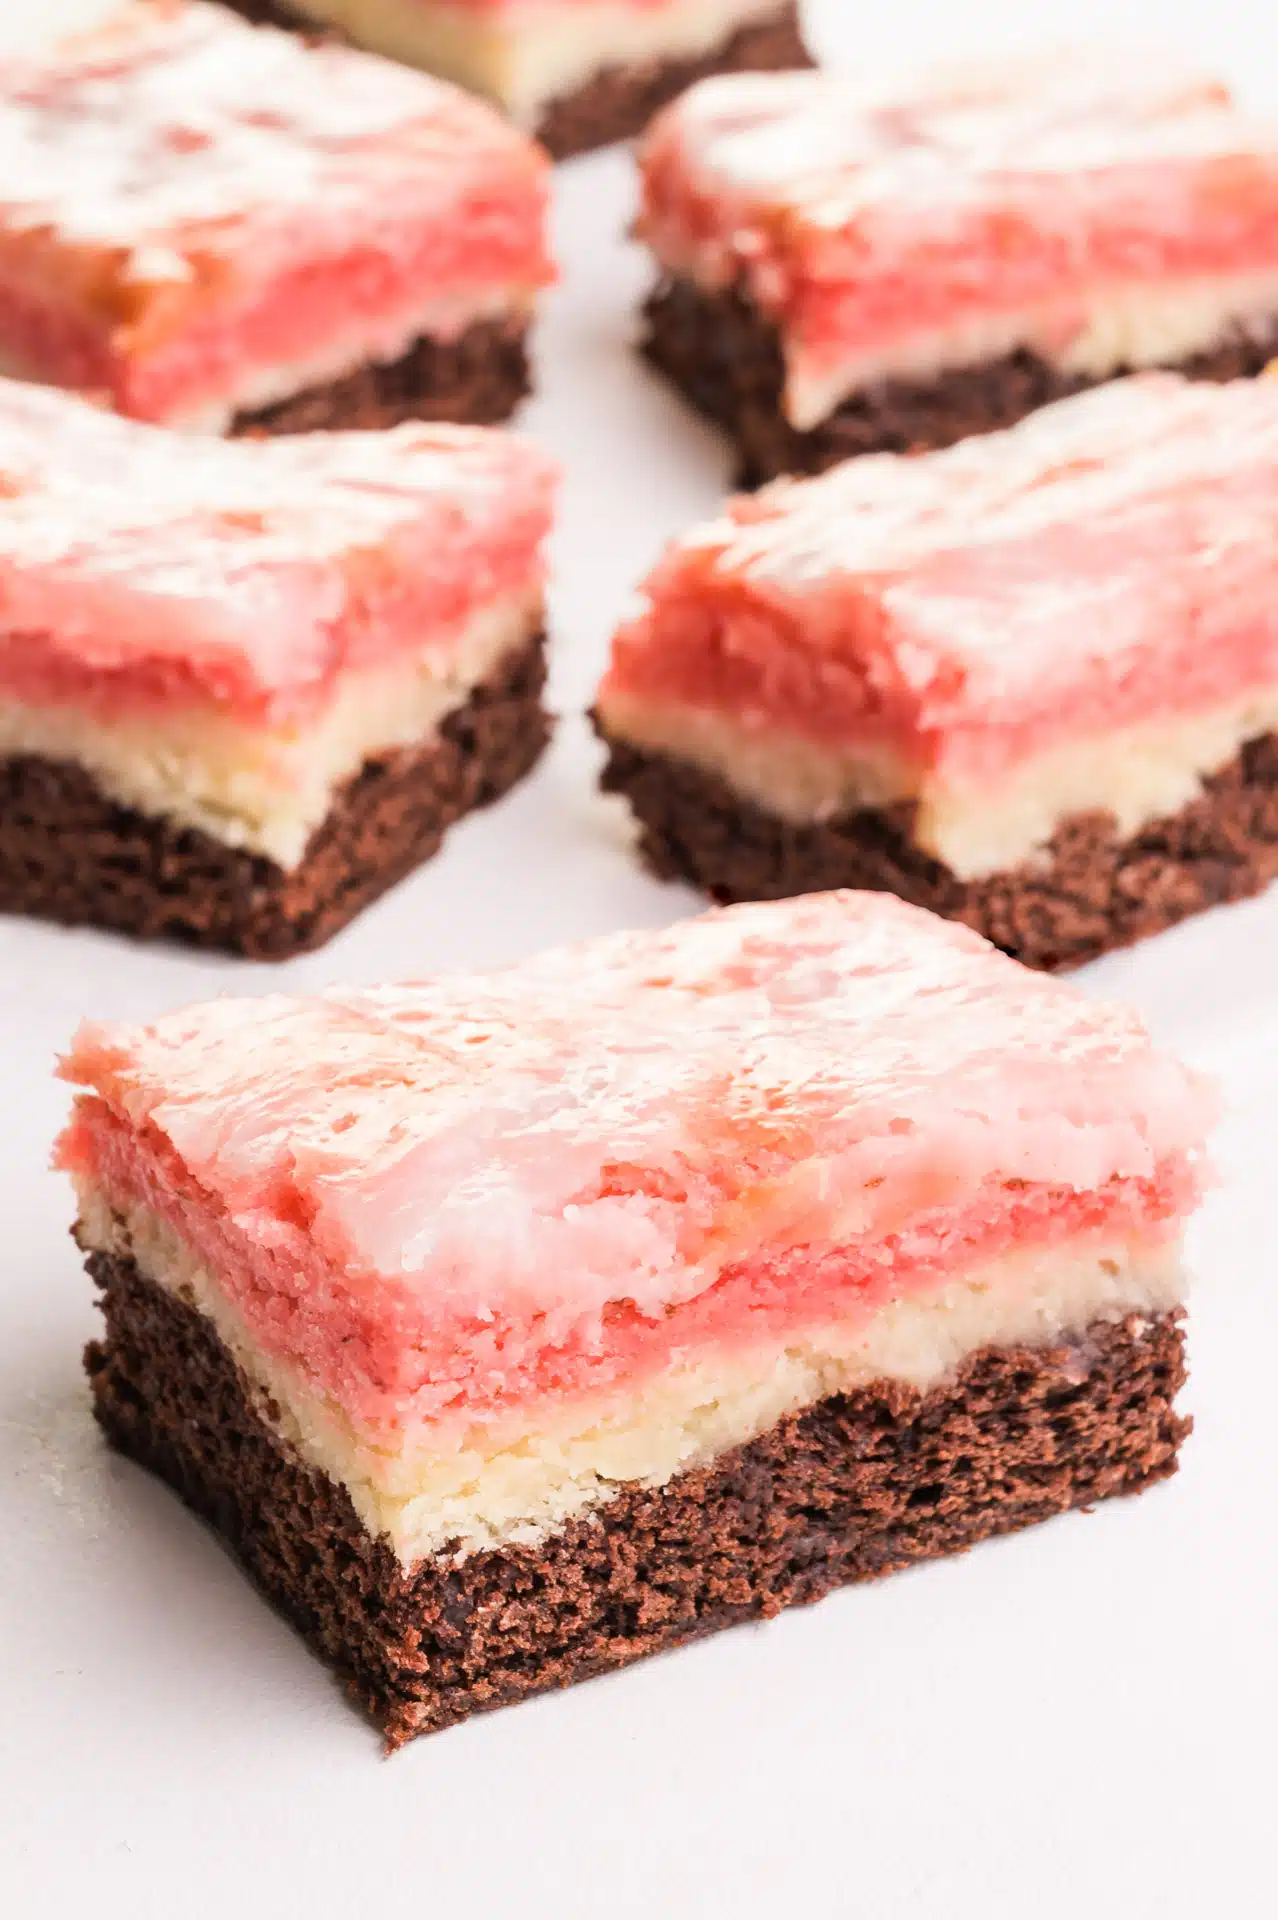 Several Neapolitan Bars sit on a white counter. The chocolate, vanilla, and strawberry treats treats have shiny tops from coconut sweetened condensed milk baked on top.